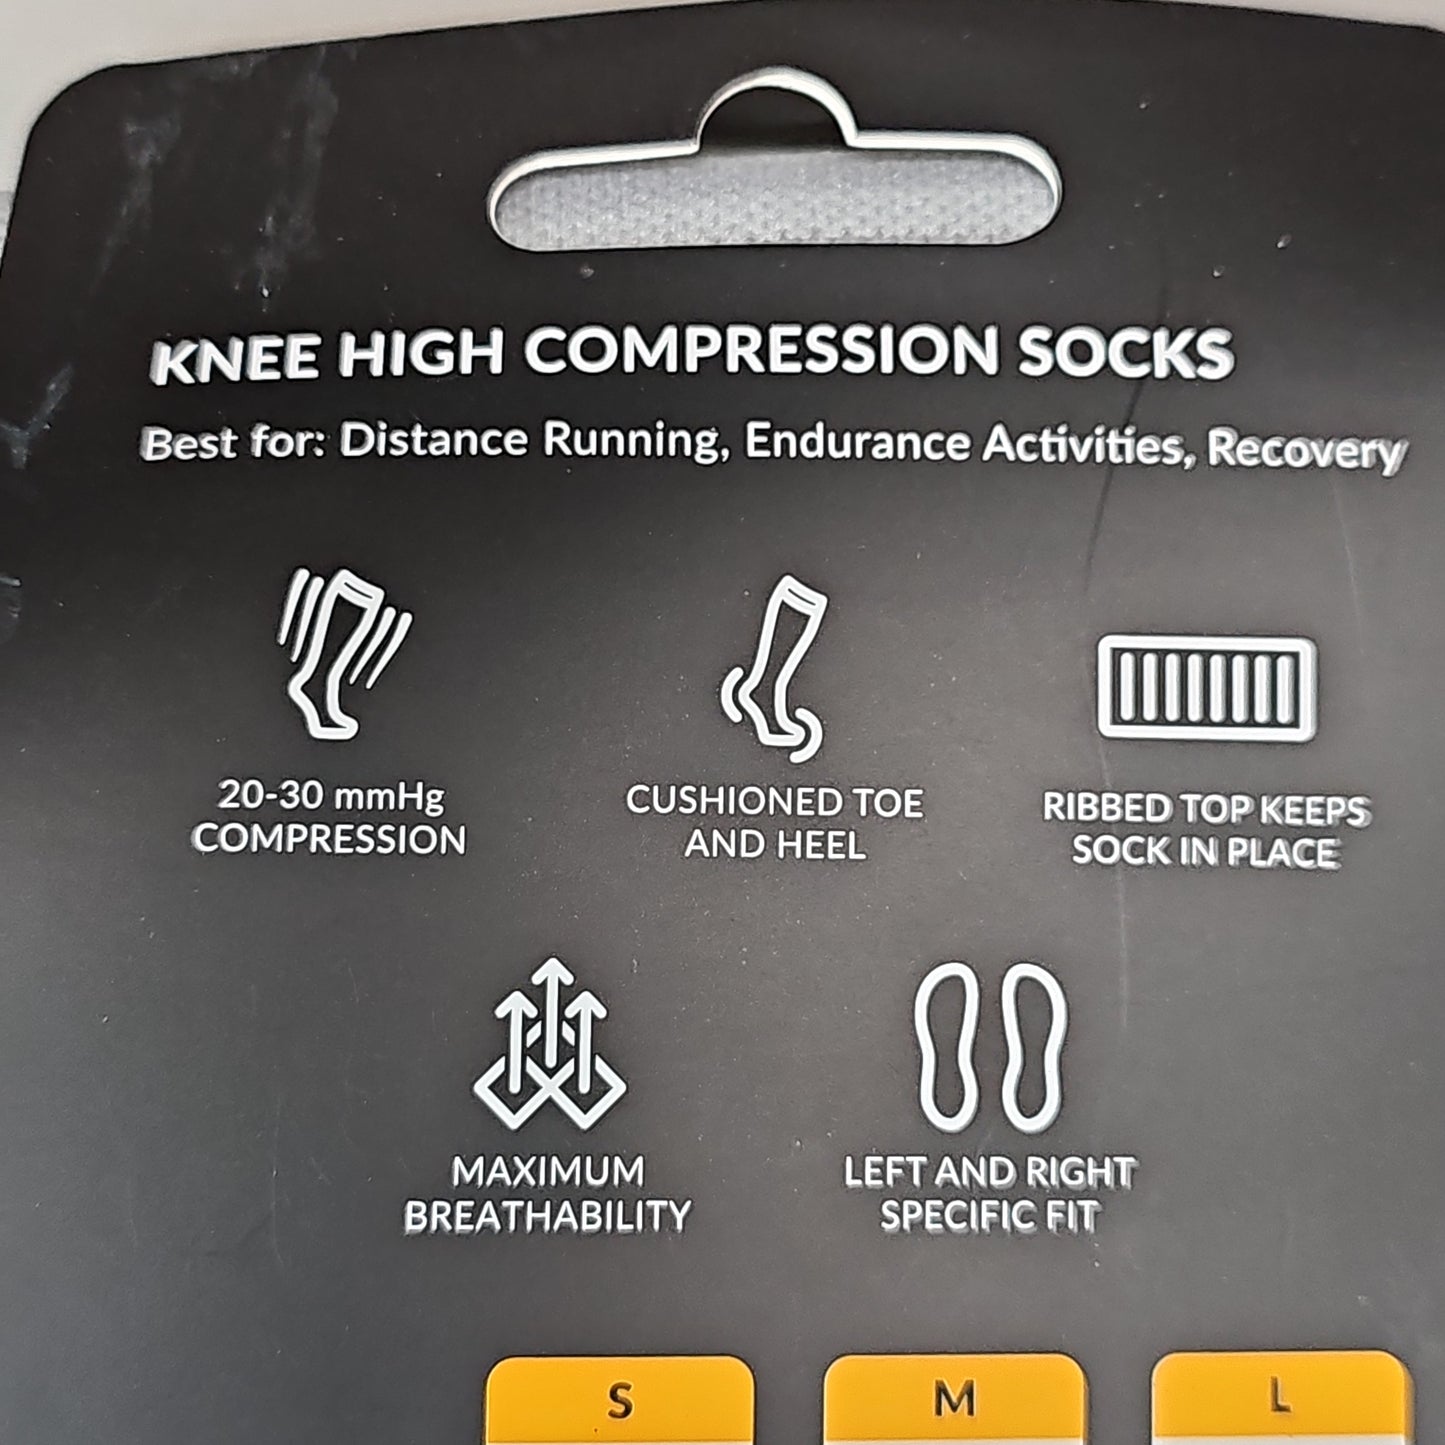 NATHAN Speed Knee High Compression Socks Sz L Monument Grey NS10660-80128-S (New)